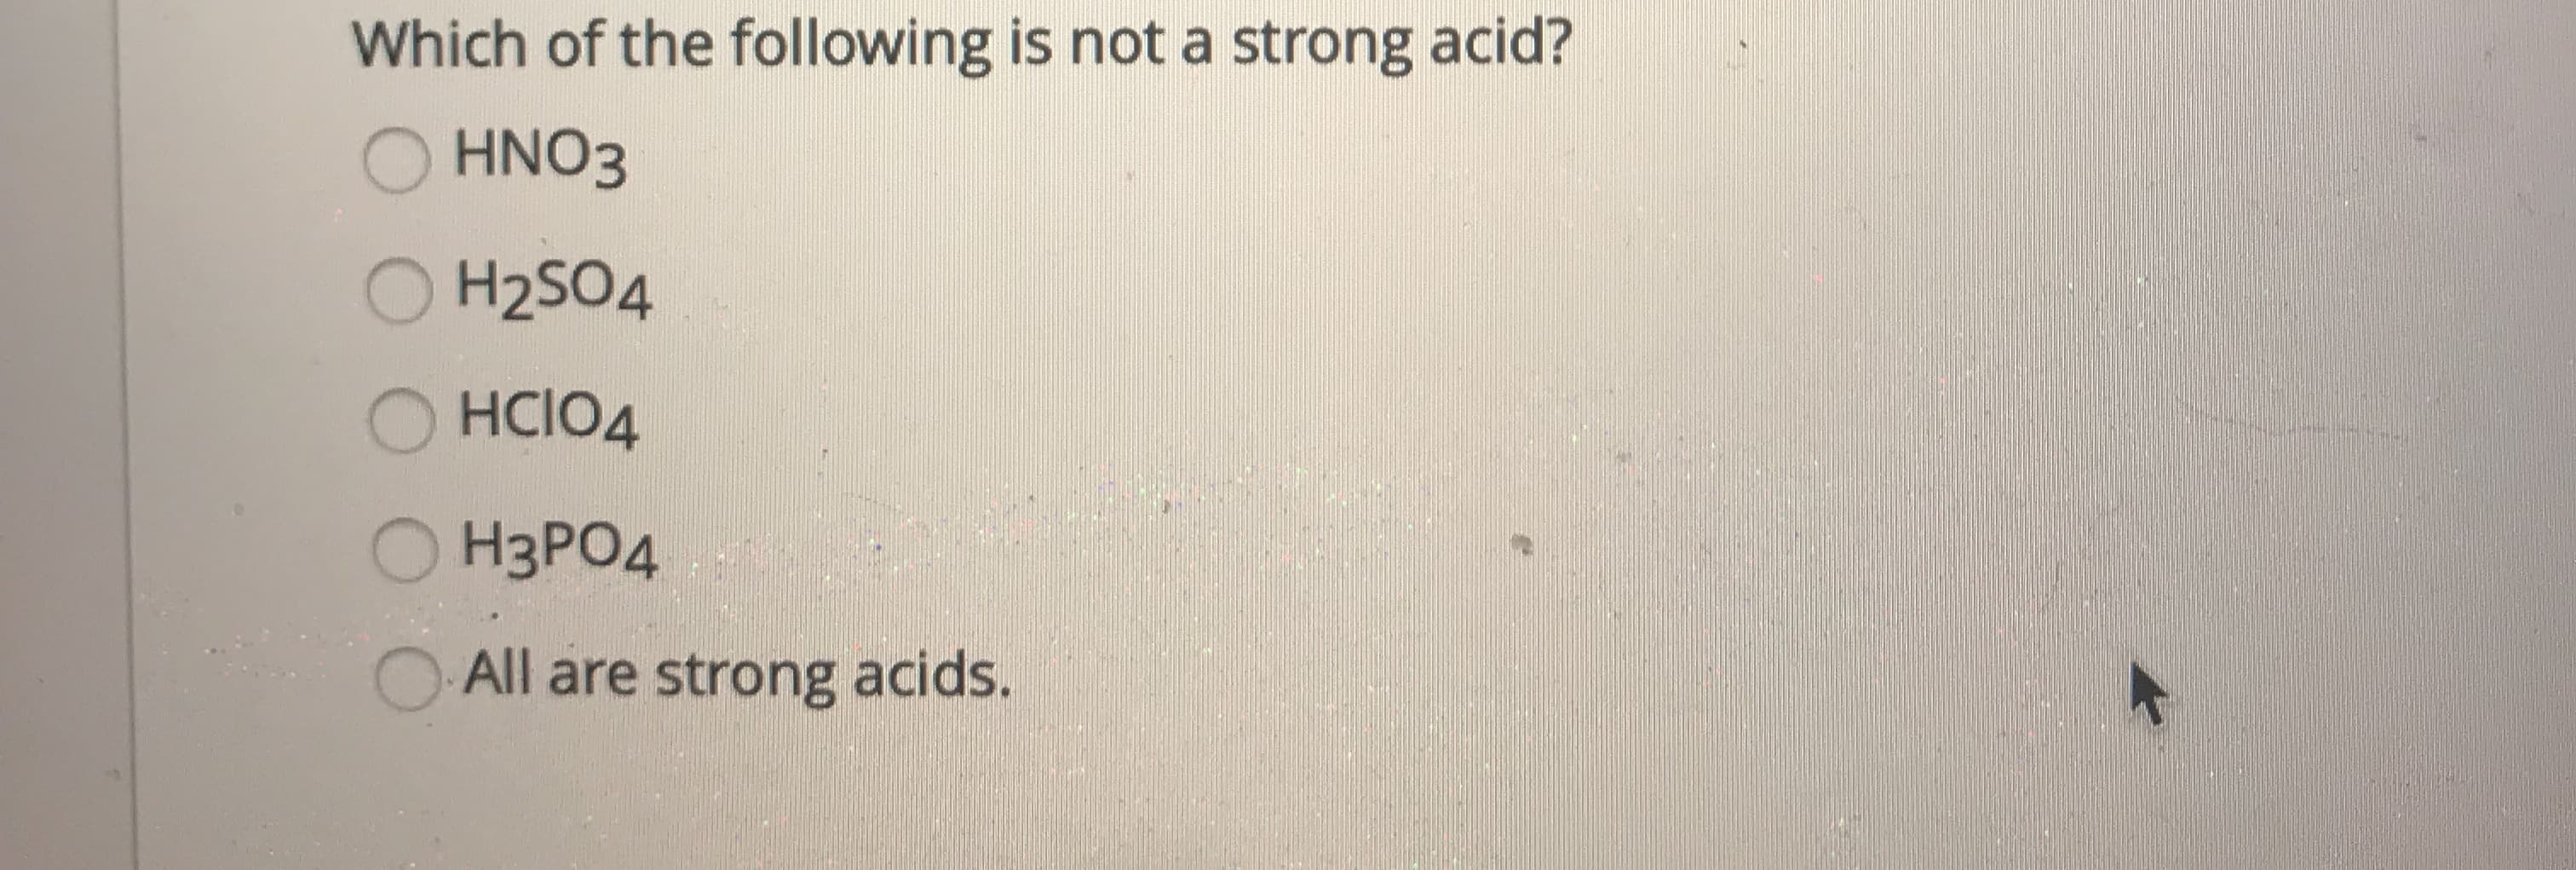 Which of the following is not a strong acid?
O HNO3
O H2SO4
HCIO4
OH3PO4
OAll are strong acids.
